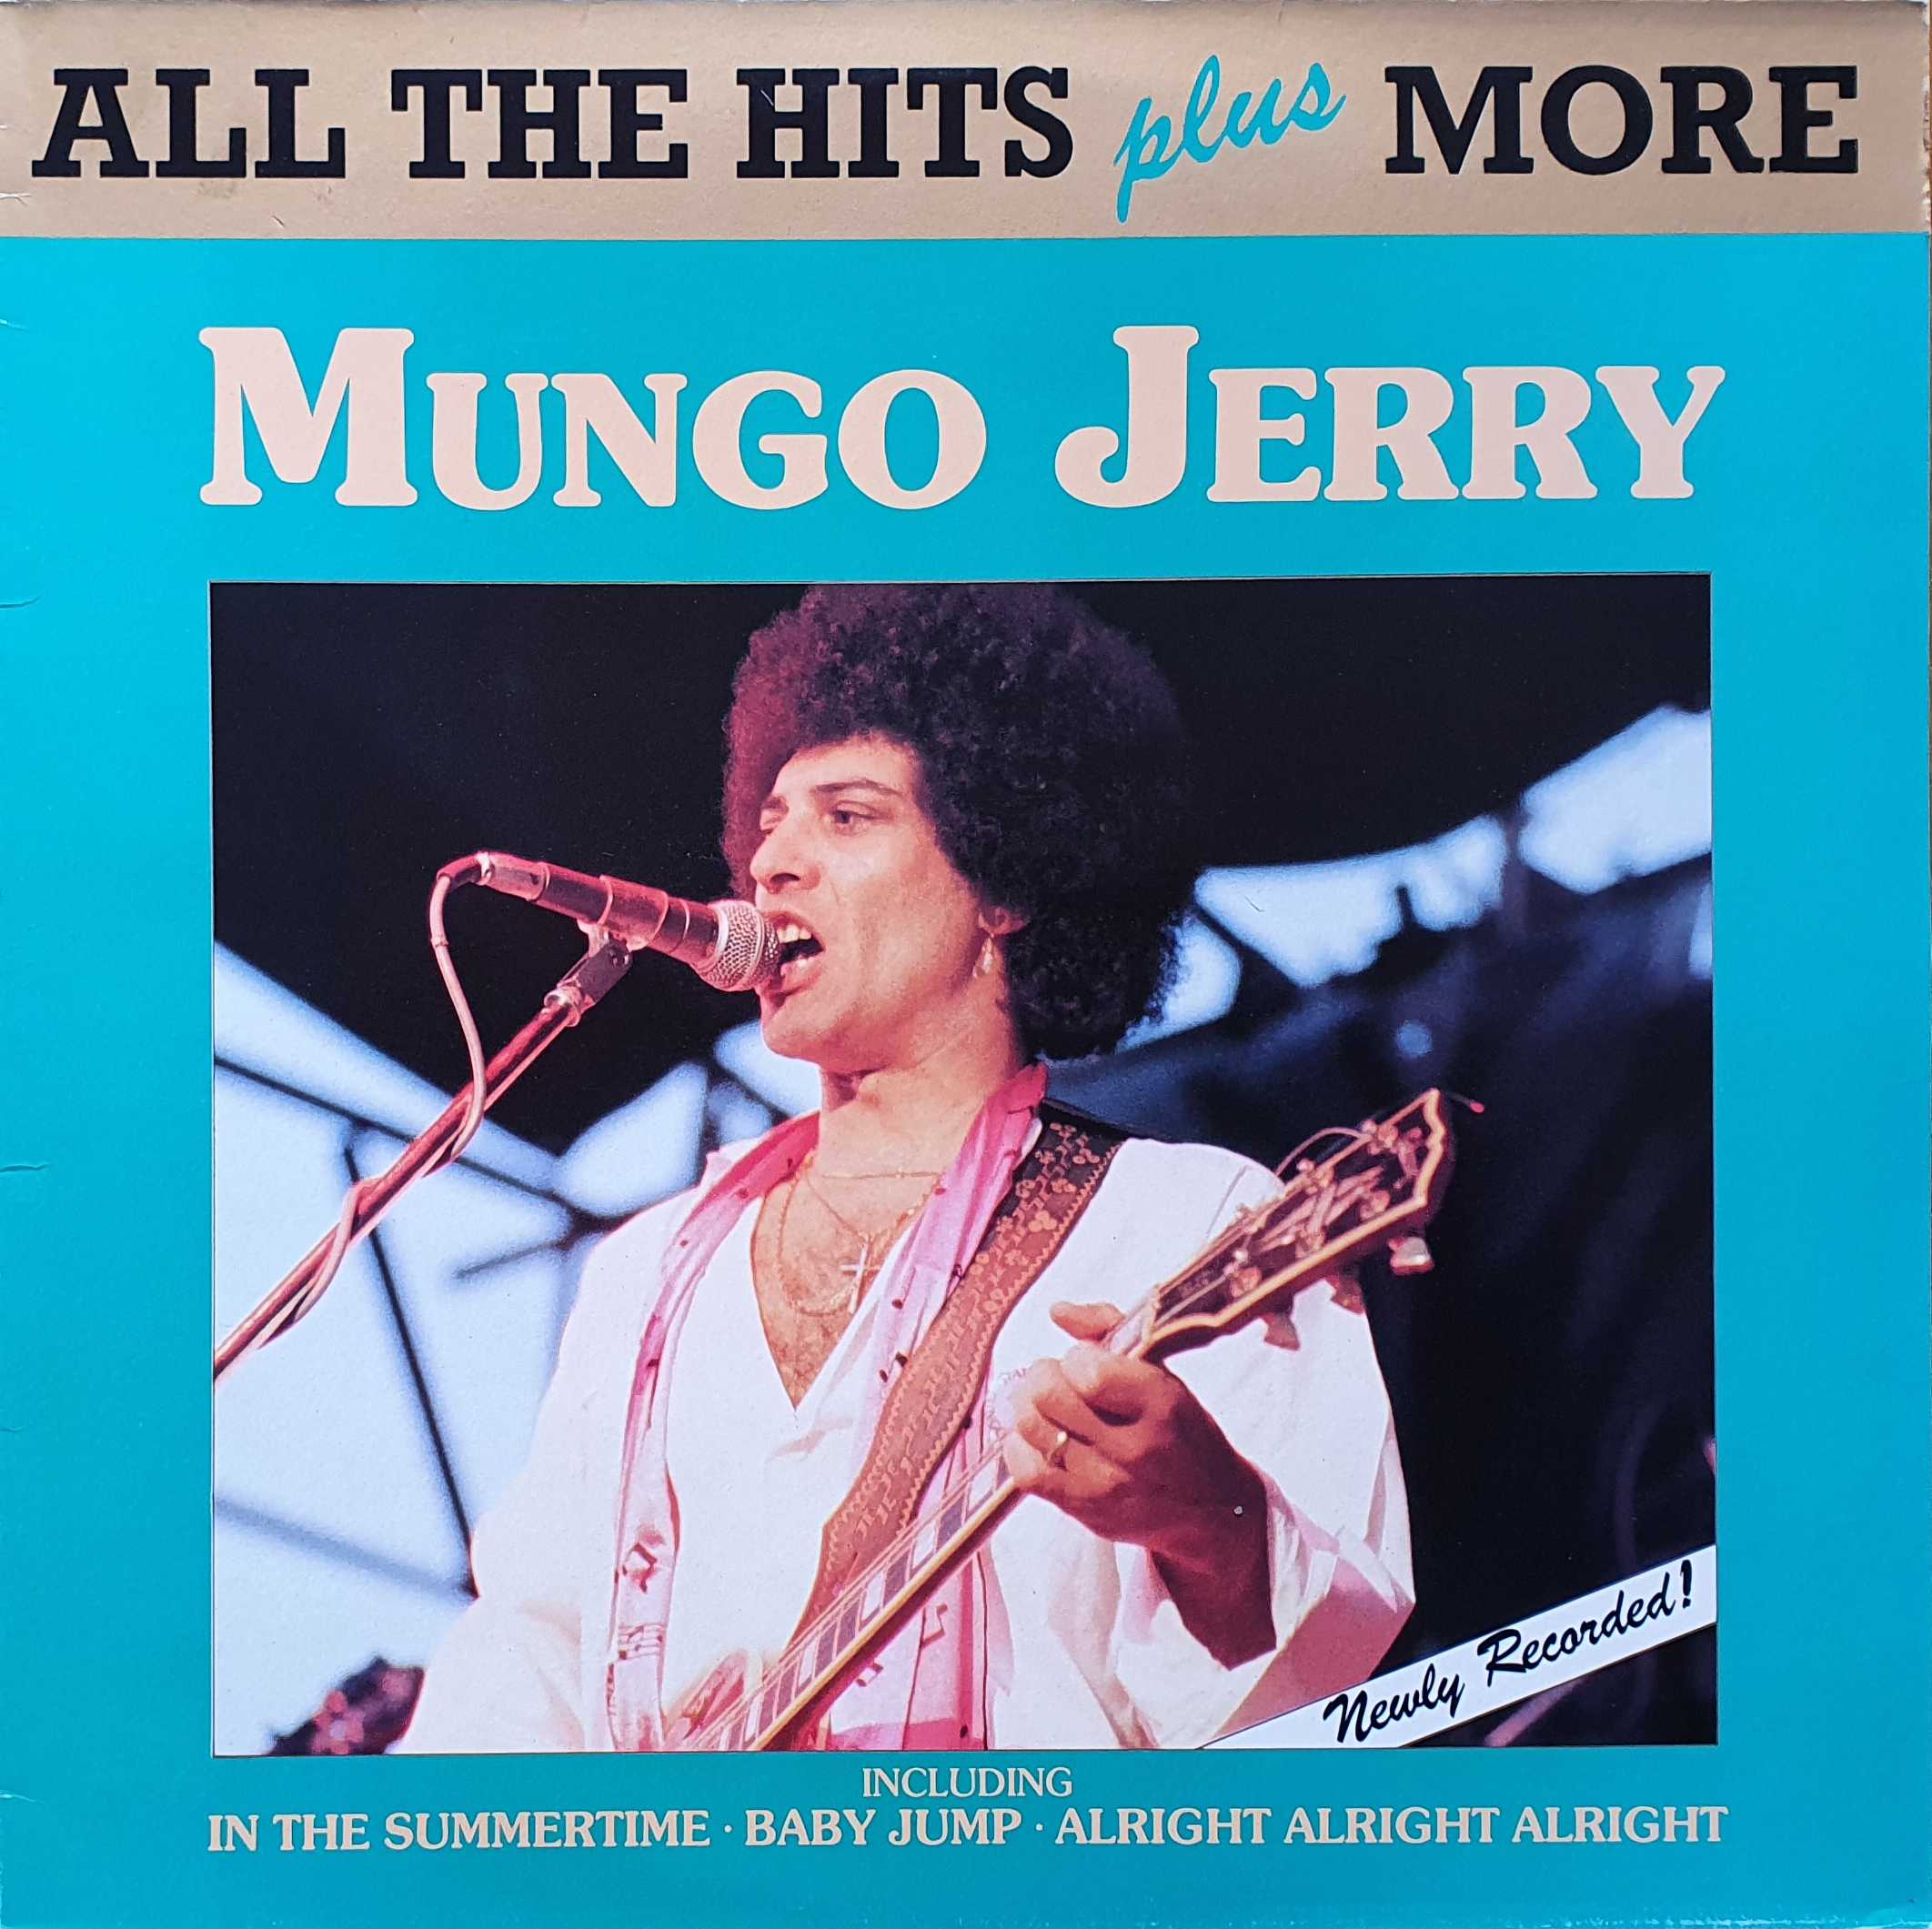 Picture of All the hits plus more by artist Mungo Jerry from the BBC albums - Records and Tapes library